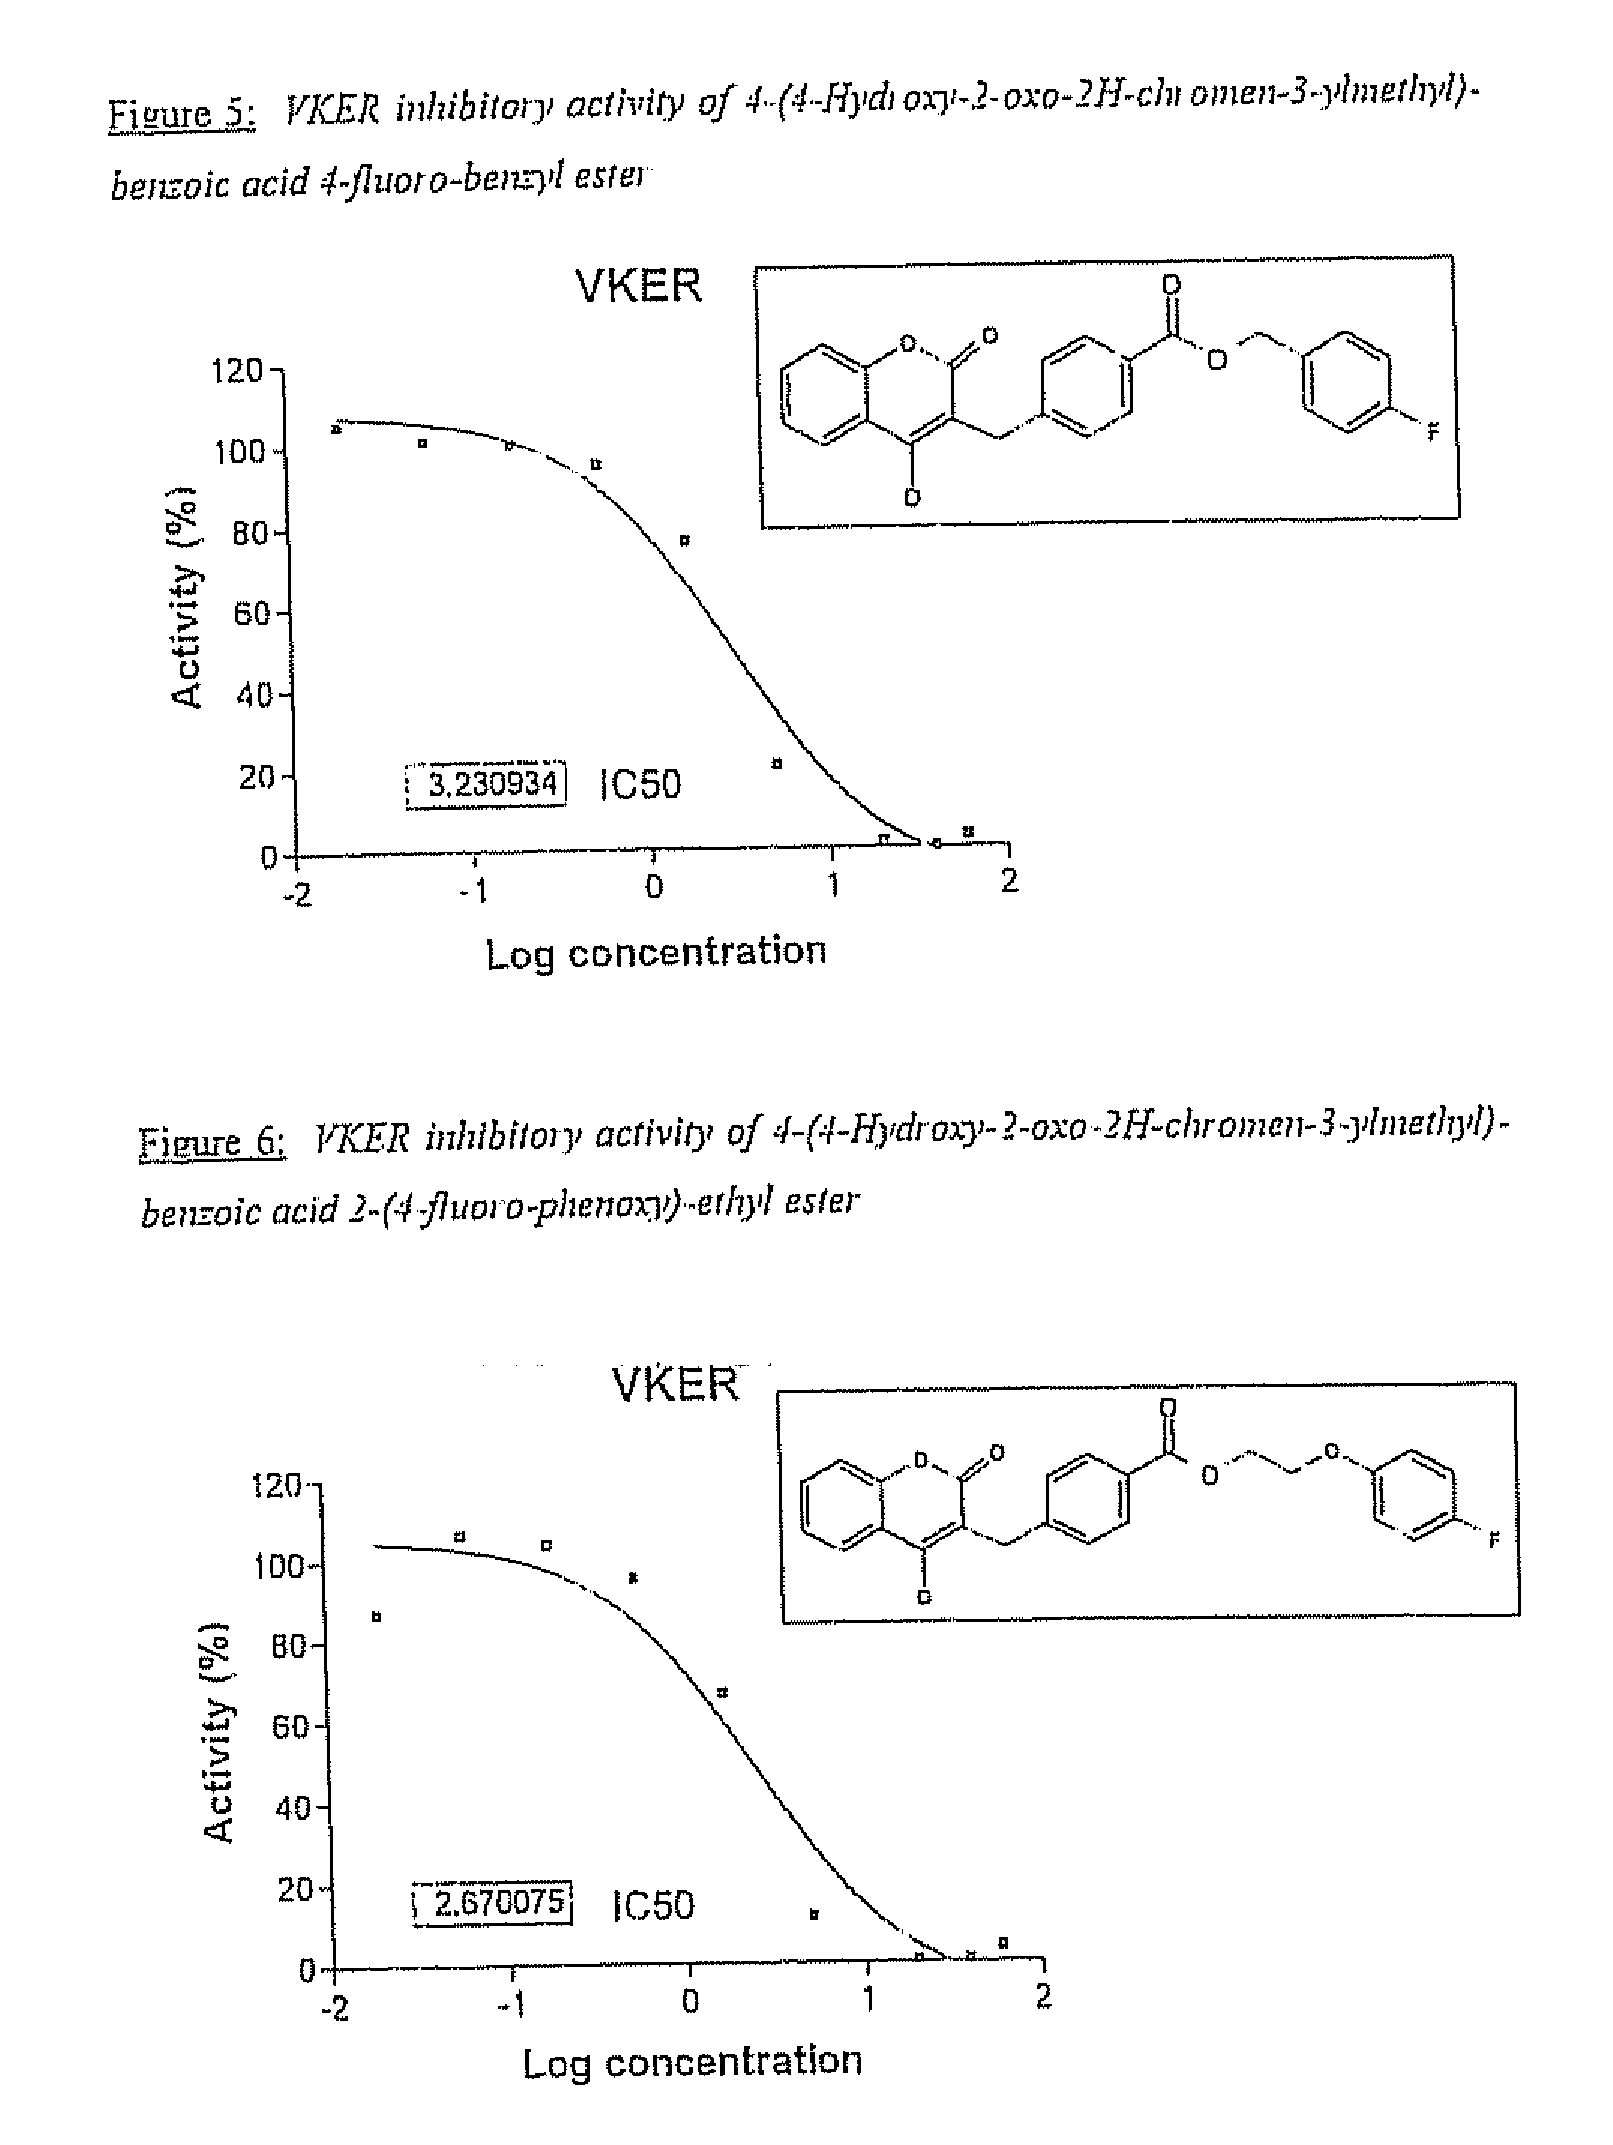 Materials and Methods for Treating Coagulation Disorders